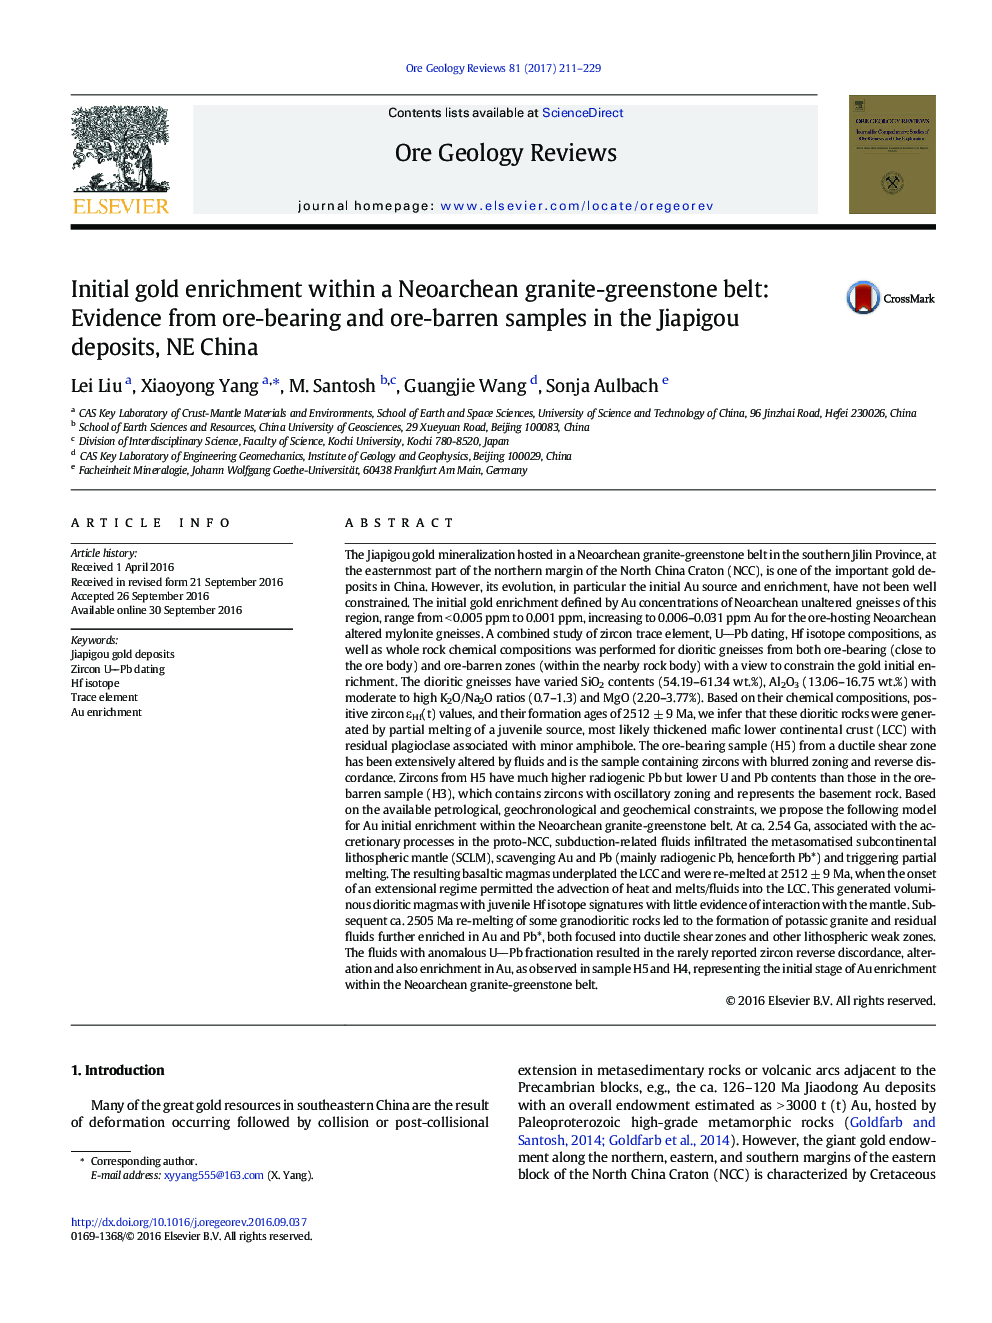 Initial gold enrichment within a Neoarchean granite-greenstone belt: Evidence from ore-bearing and ore-barren samples in the Jiapigou deposits, NE China